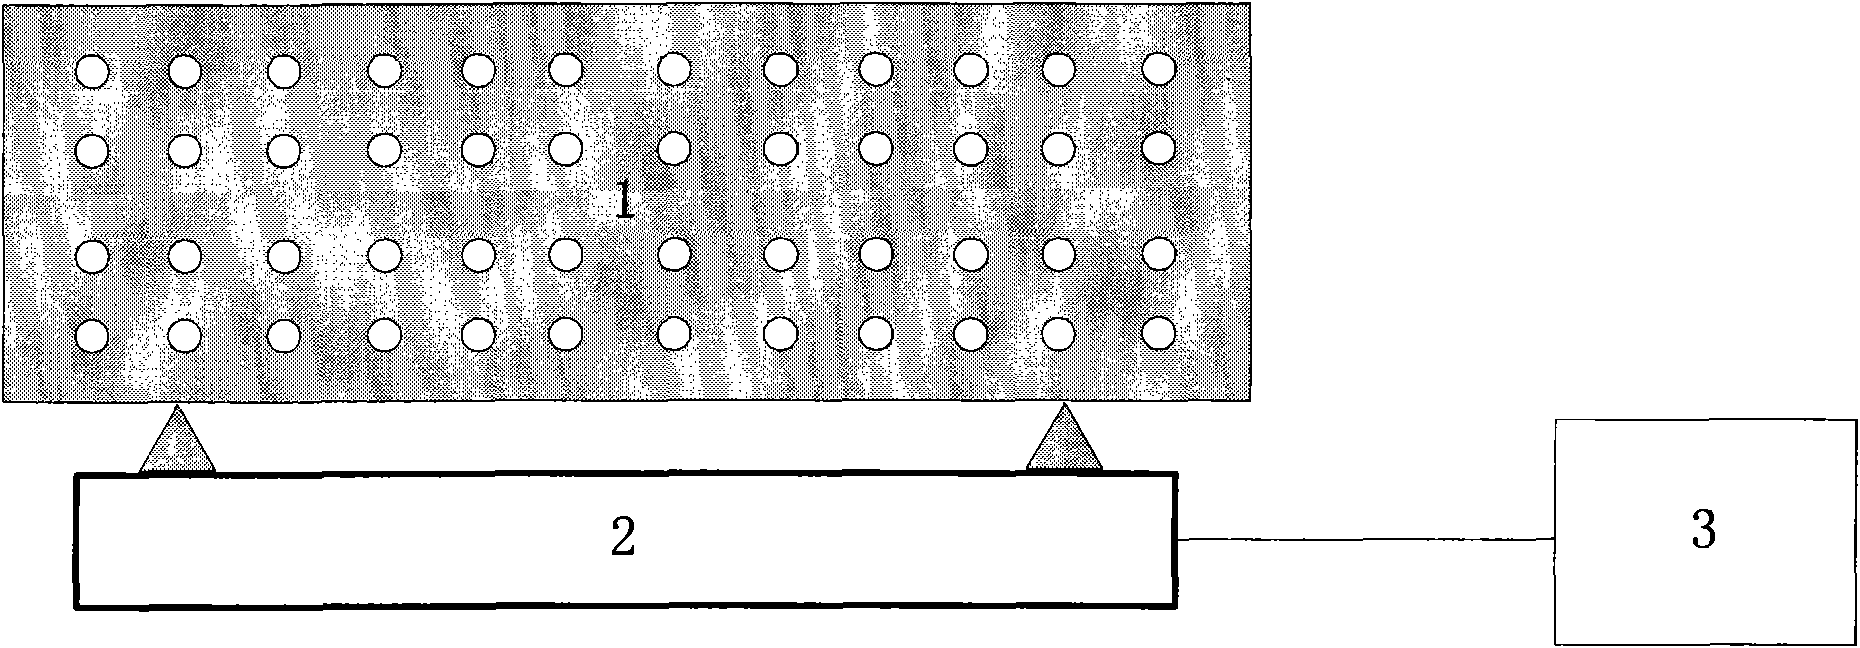 Method of computing water content in seed sprout and online dehydration computing system